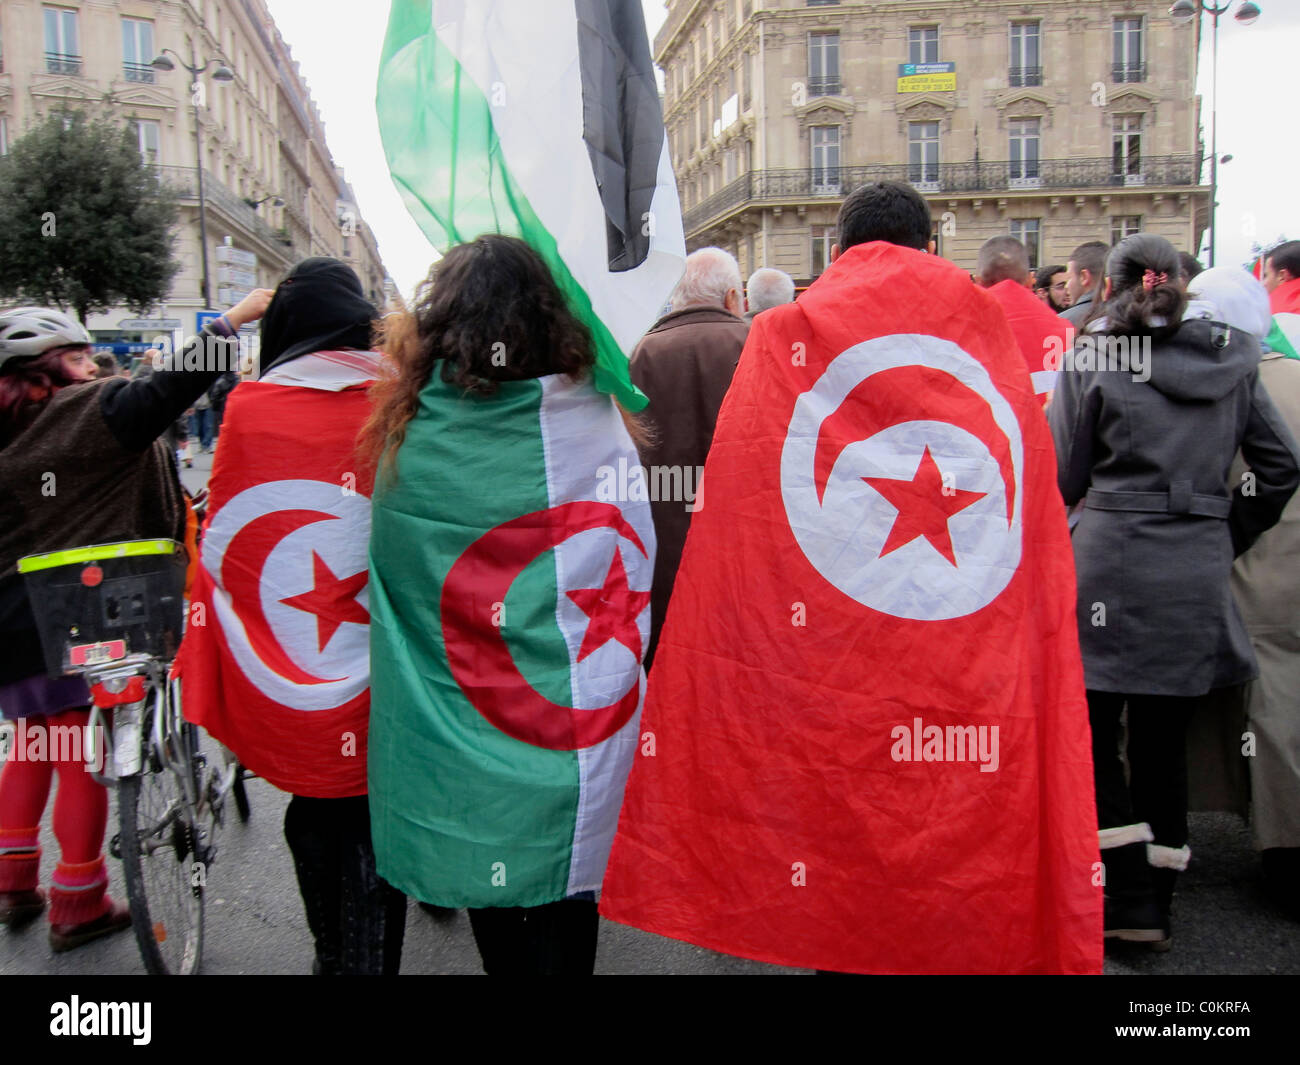 Paris, France, Crowd People, Behind, Libya Demonstration, Solidarity of Libyan Revolution 'Arab Spring Protests' Different COuntry Flags, Algeria, Tunisia,  Arabic spring, politics, Muslims, 2011 Stock Photo